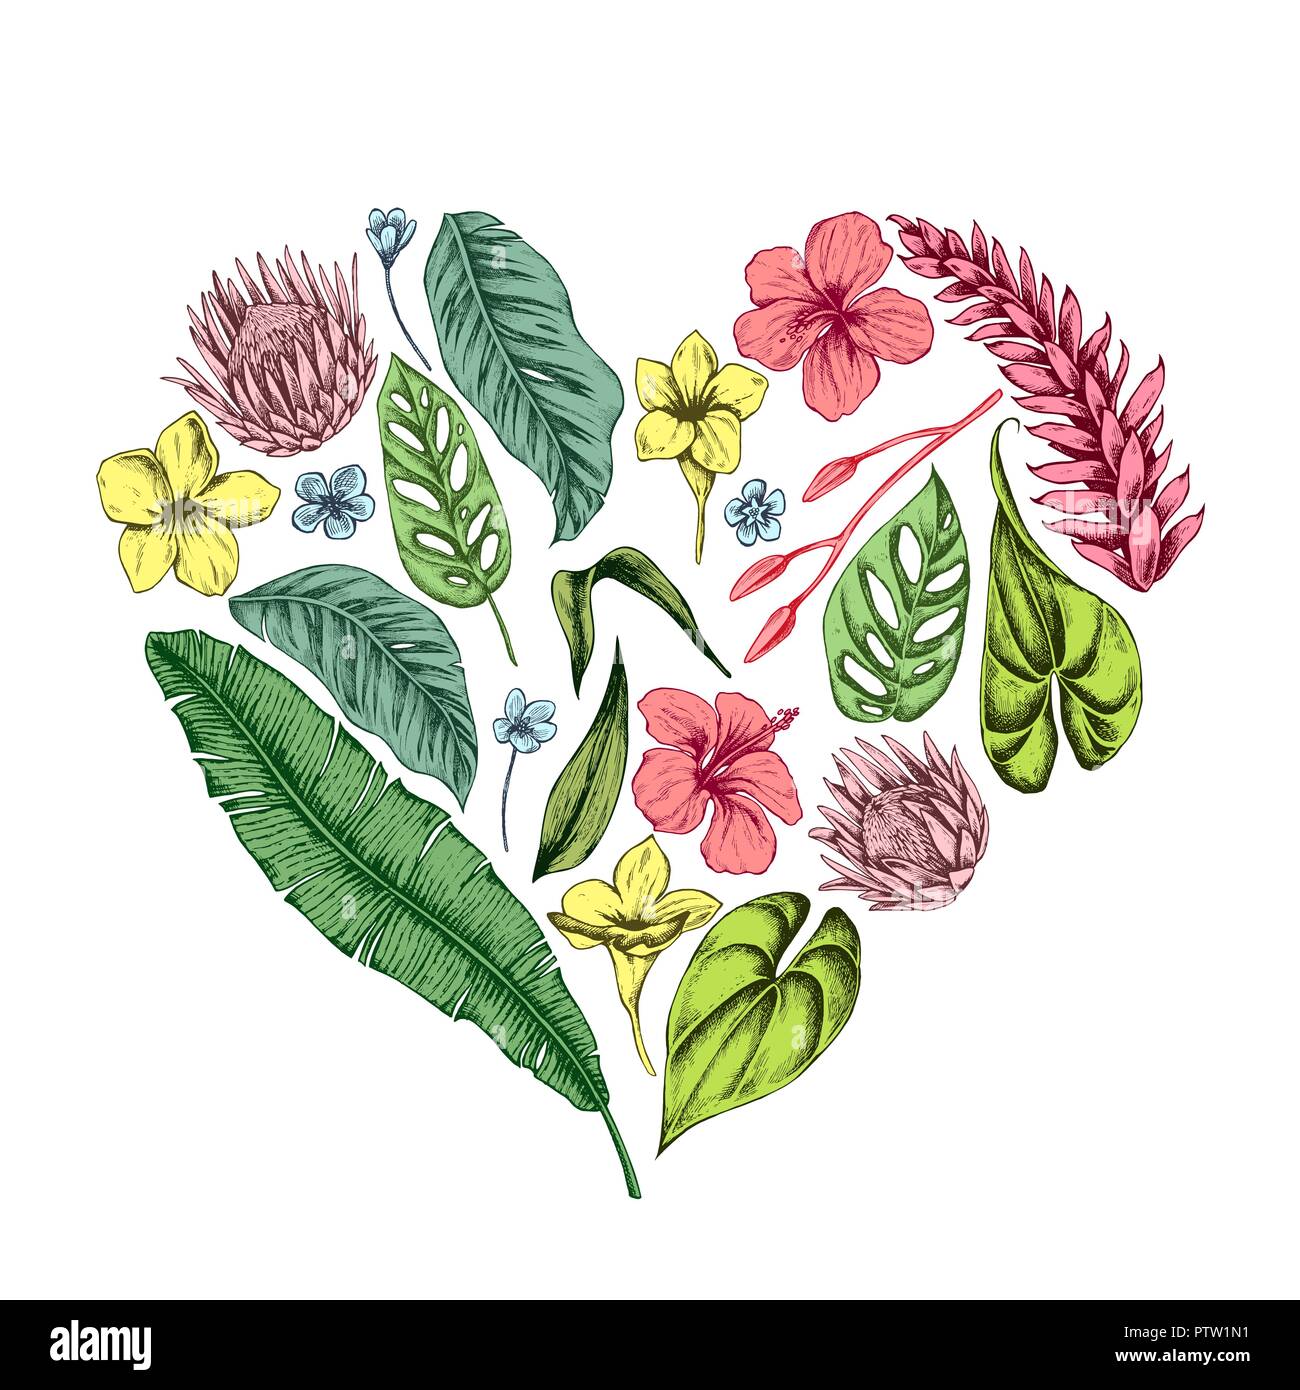 Vector collection of hand drawn tropical plants Stock Vector